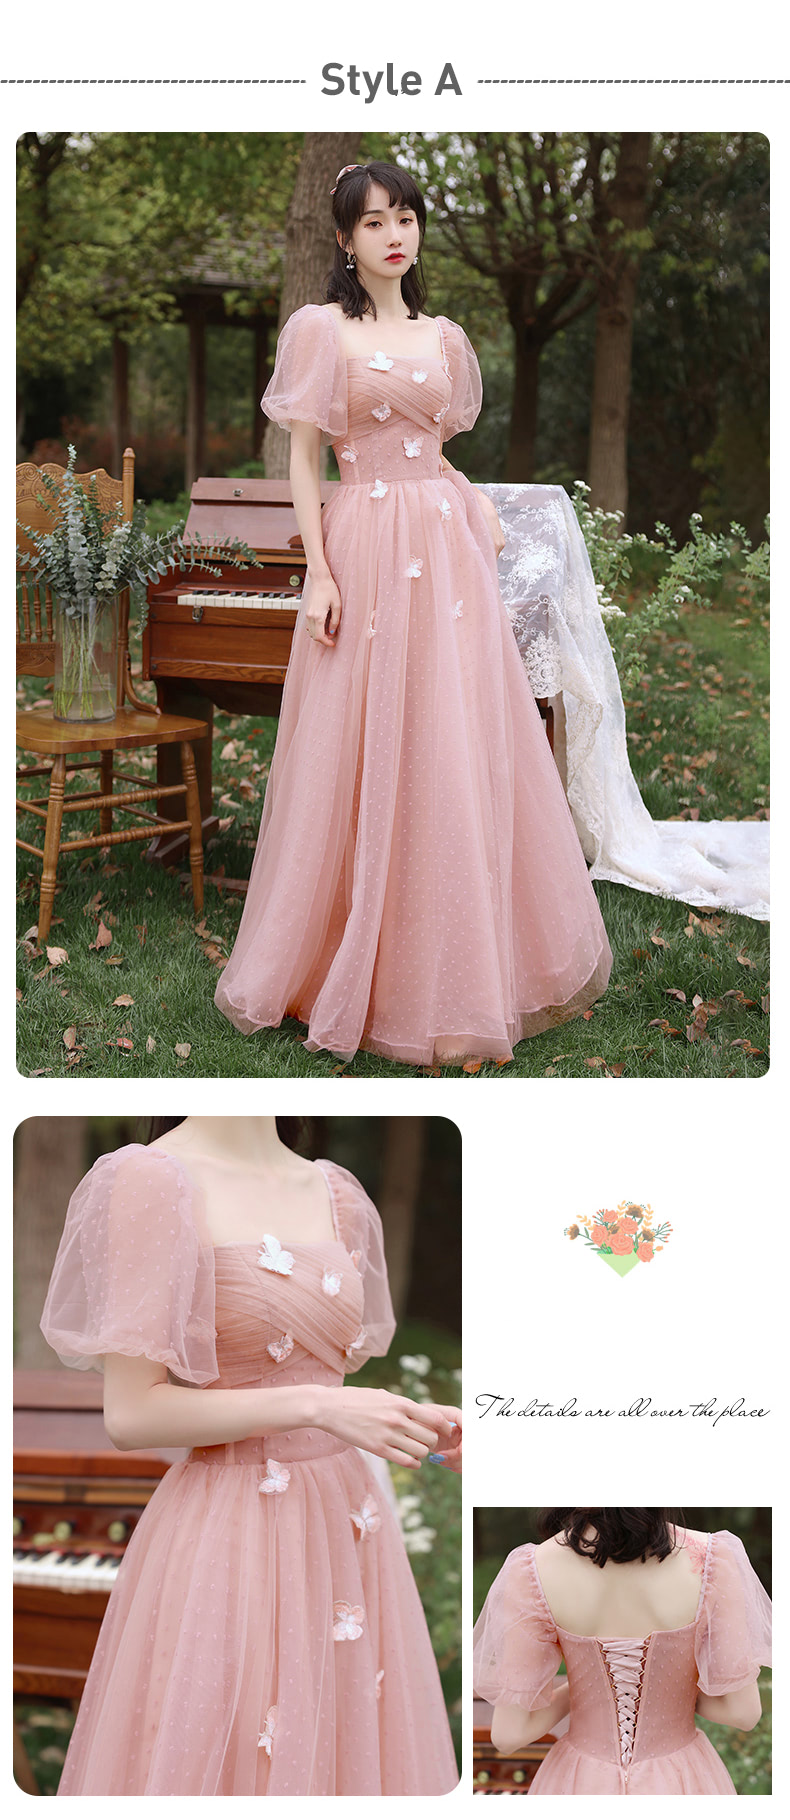 A-Line-Pink-Tulle-Bridesmaid-Formal-Wedding-Guest-Party-Dress15.jpg